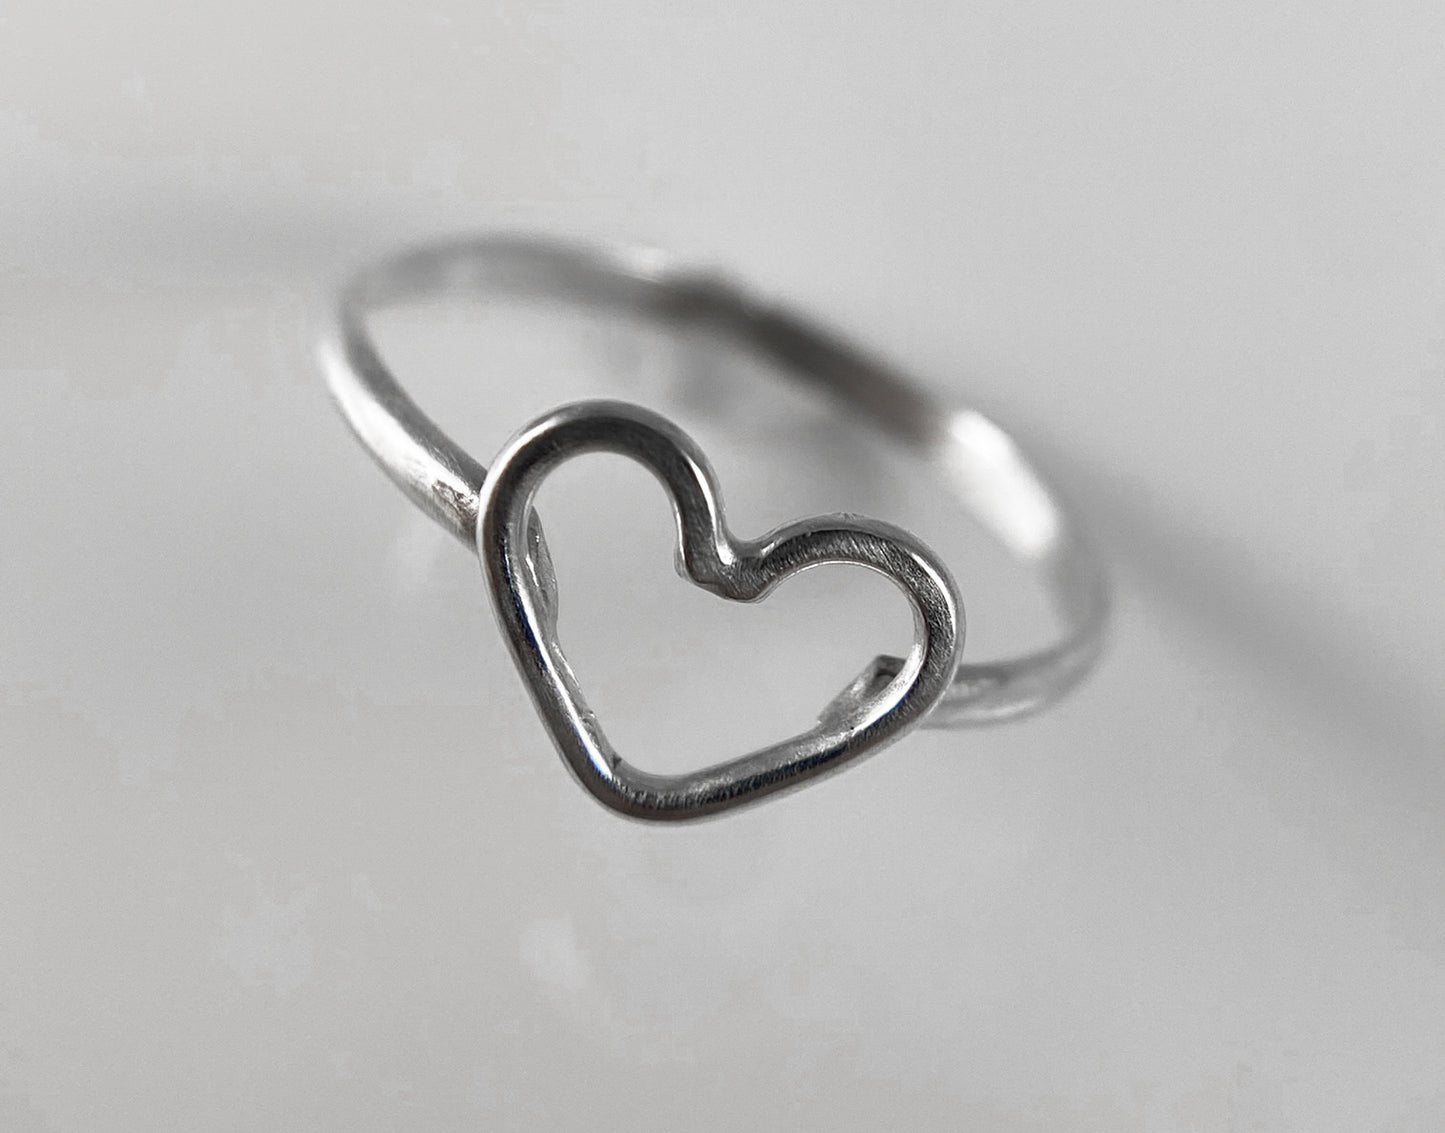 Heart Silhouette Ring